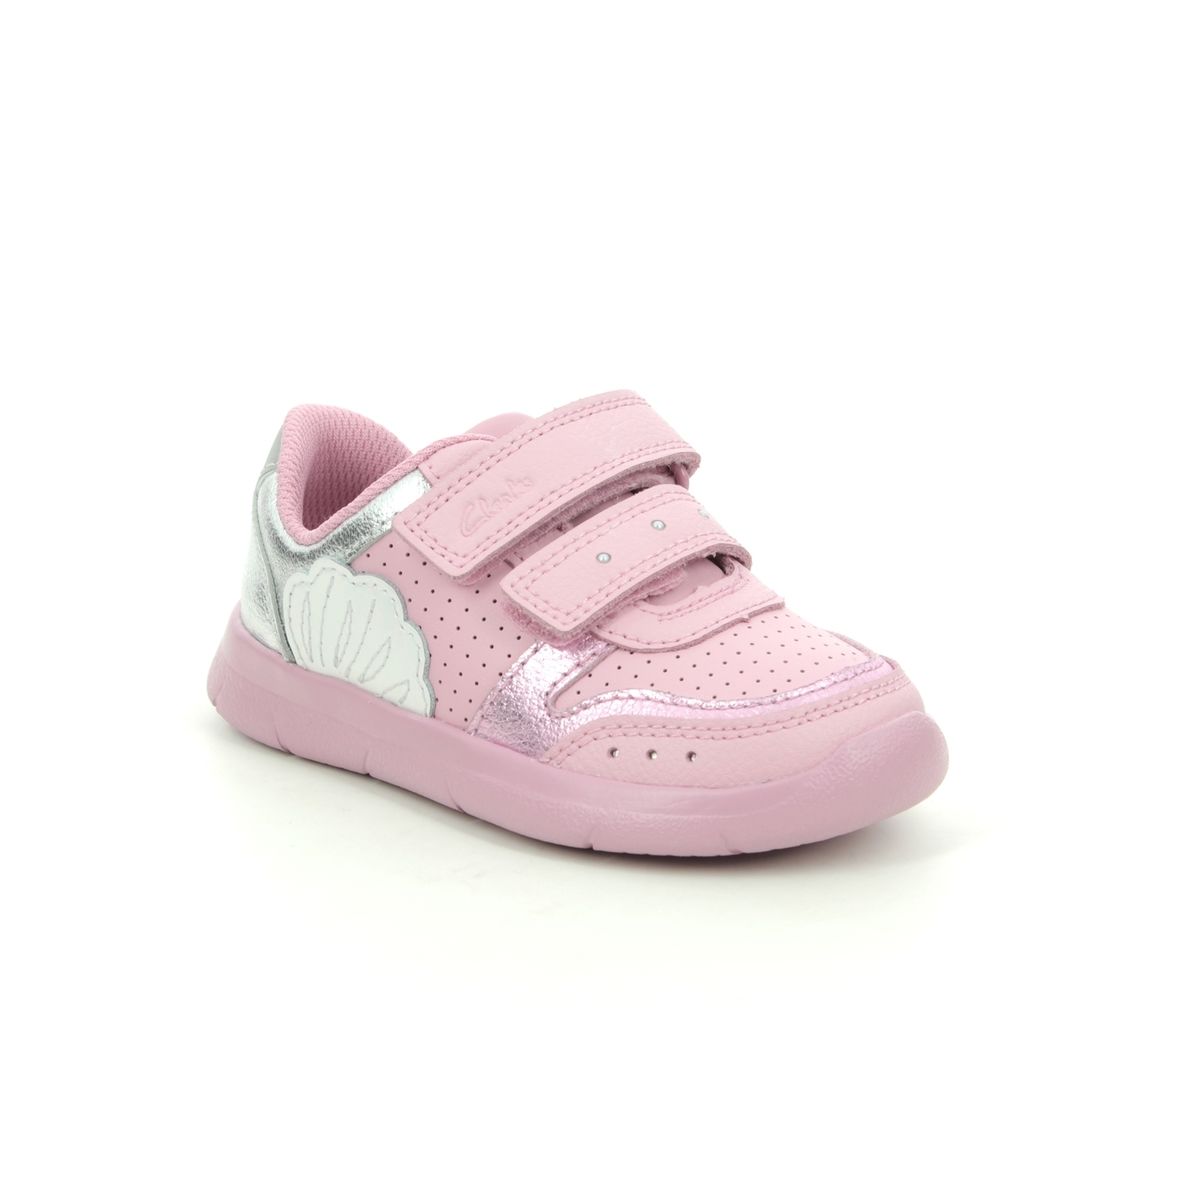 Clarks Ath Shell T Pink Leather Kids Toddler Girls Trainers 588096F In Size 4.5 In Plain Pink Leather F Width Fitting Regular Fit For kids